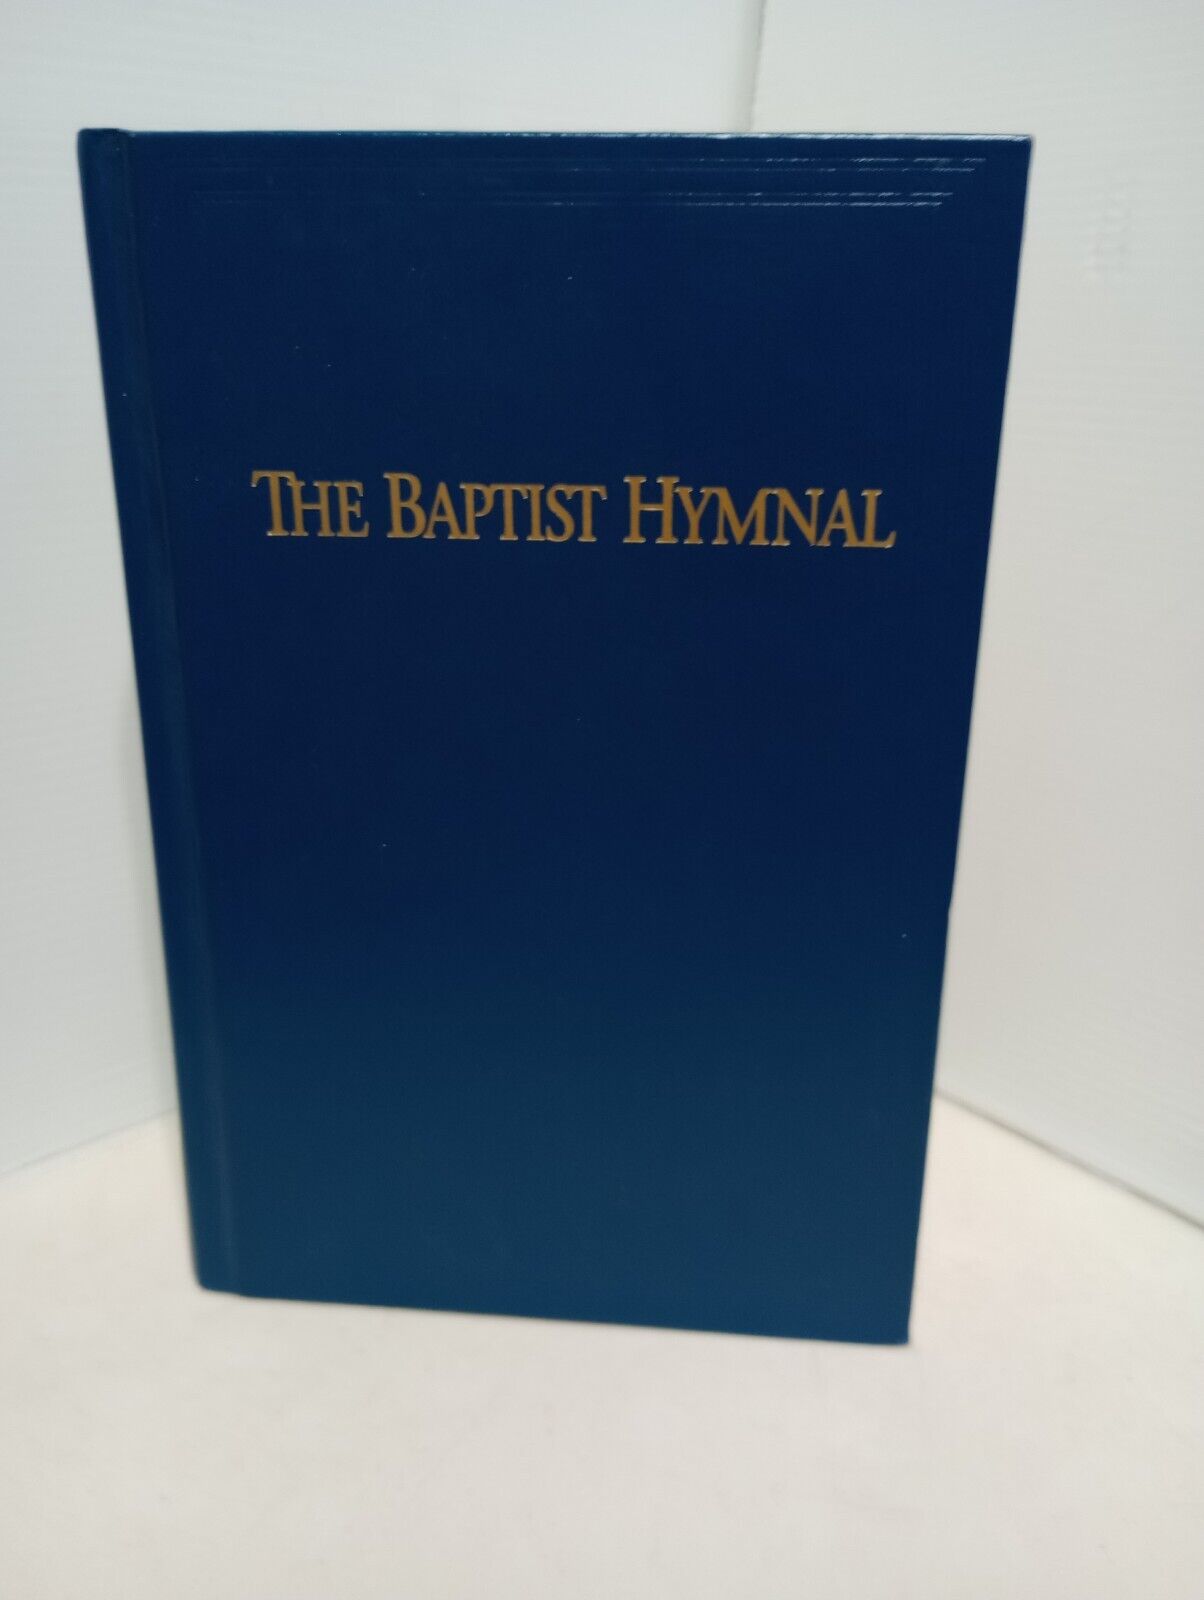 The Baptist Hymnal 1991 Hard Cover Teal Blue by Convention Press